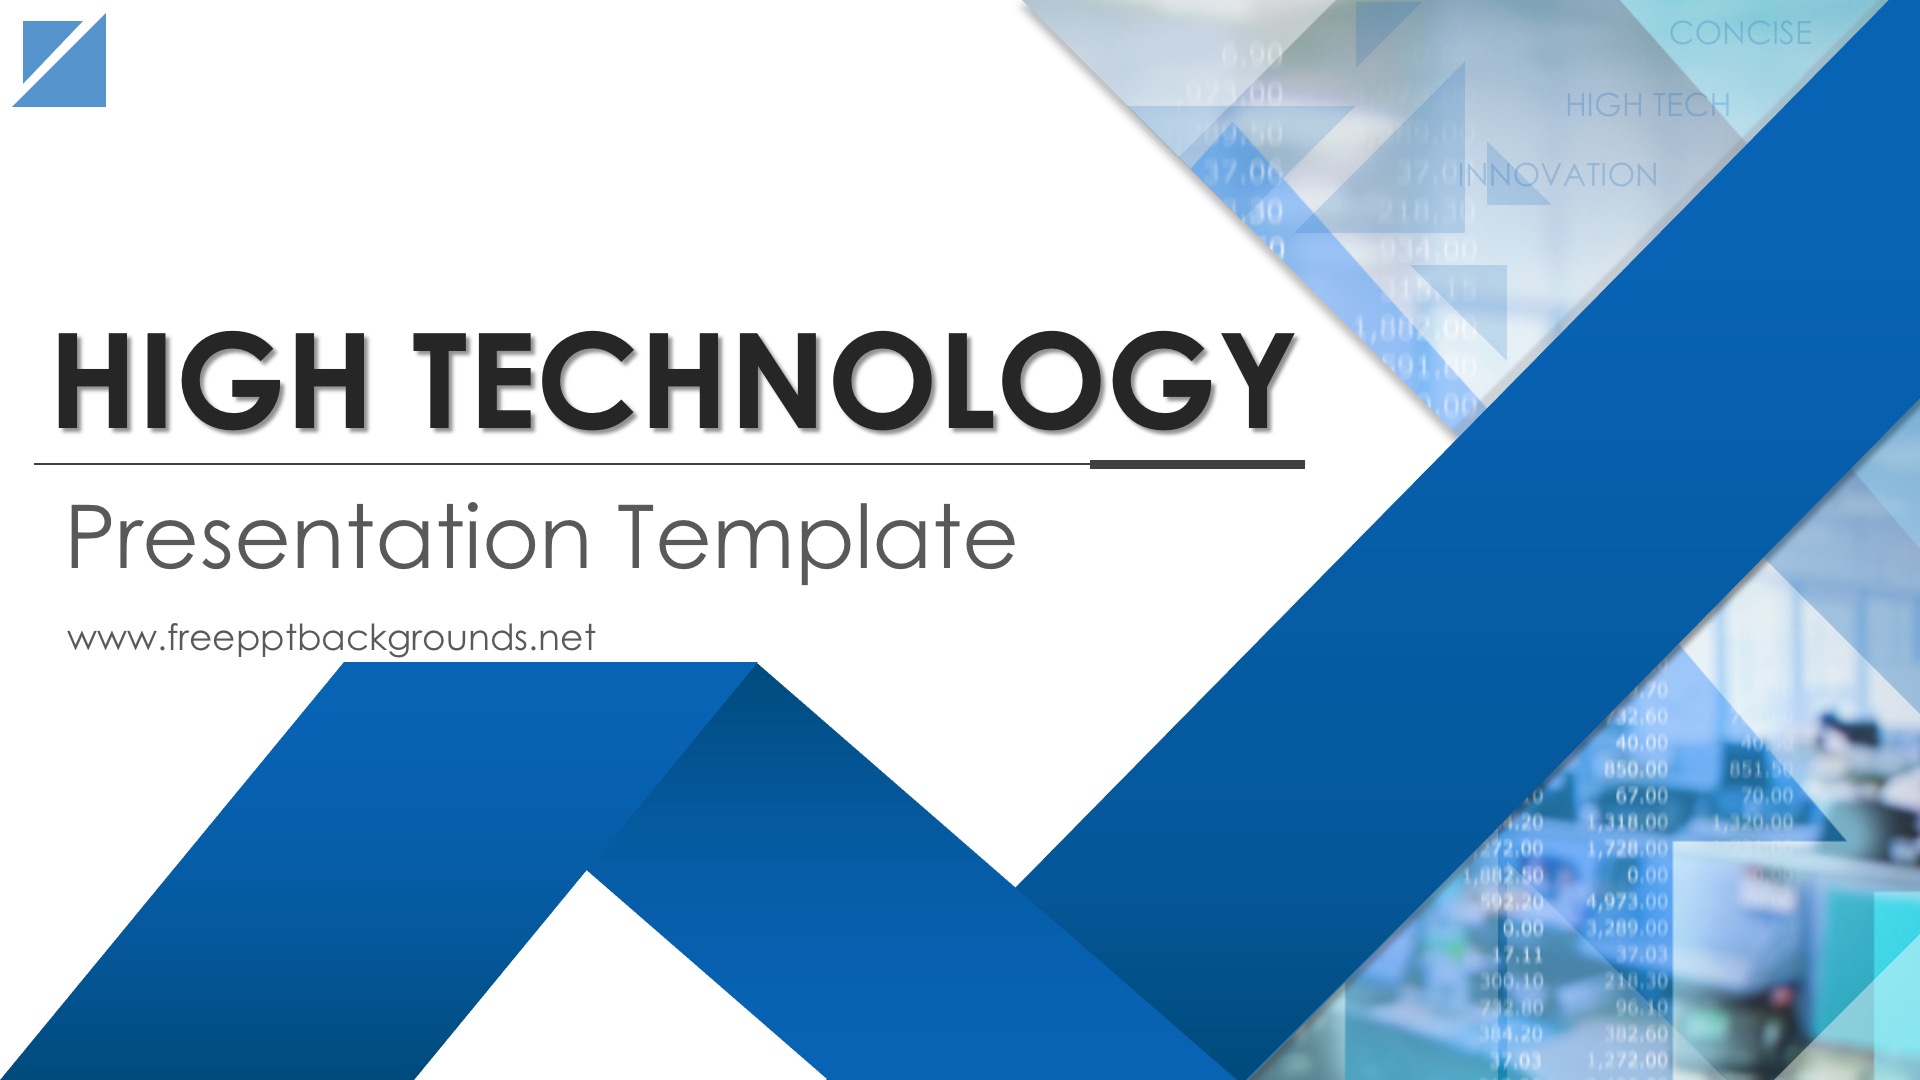 Powerpoint Templates For Technology Presentations Toptemplate my id